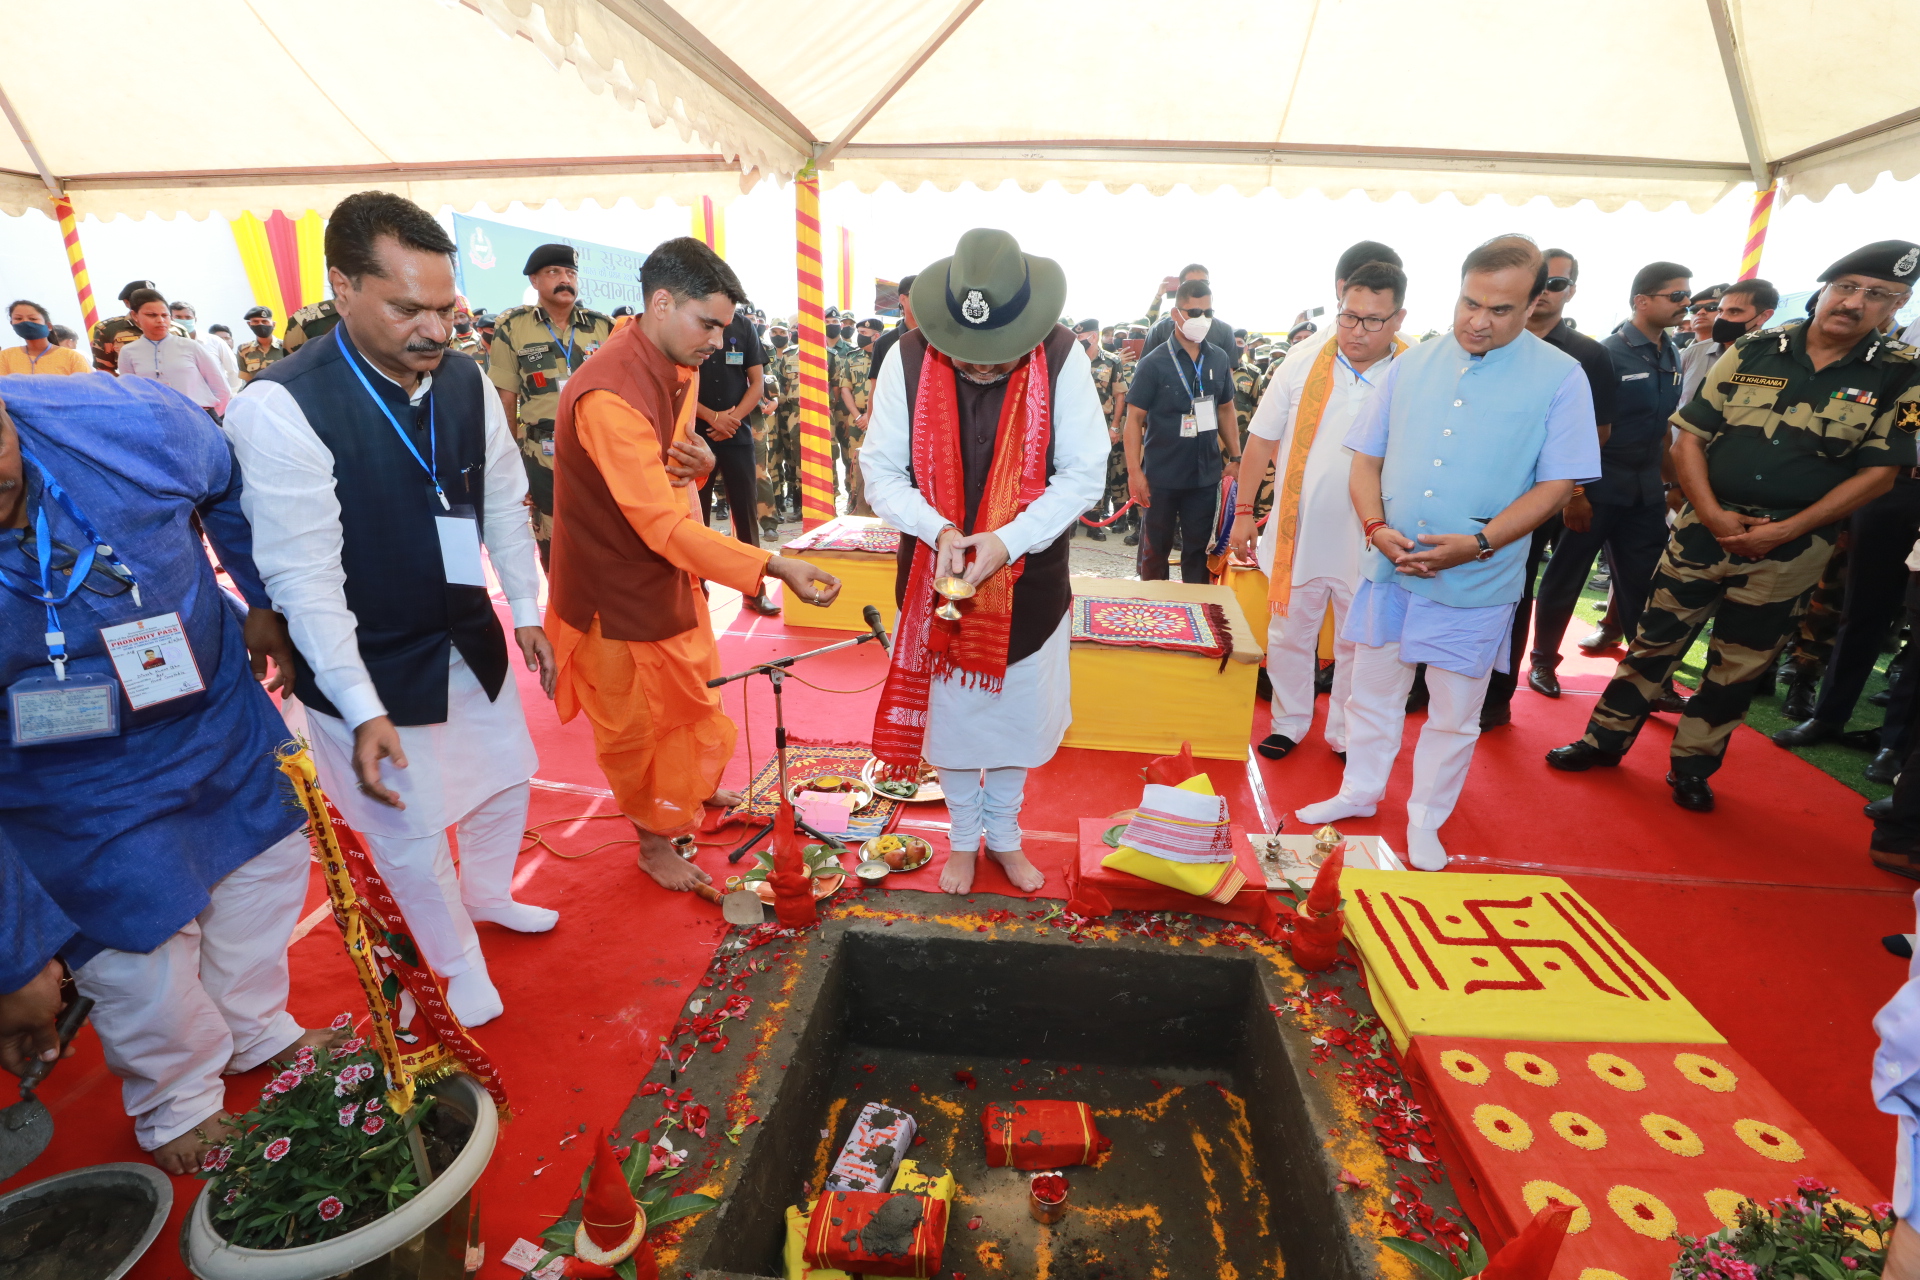 Union Minister for Home & Cooperation, Shri Amit Shah today performed the Bhoomi Pujan of BSF's Central Workshop and Store (CENWOSTO) at Tamulpur, Assam and inaugurated Khadi and Village Industries products at CAPFs Canteen